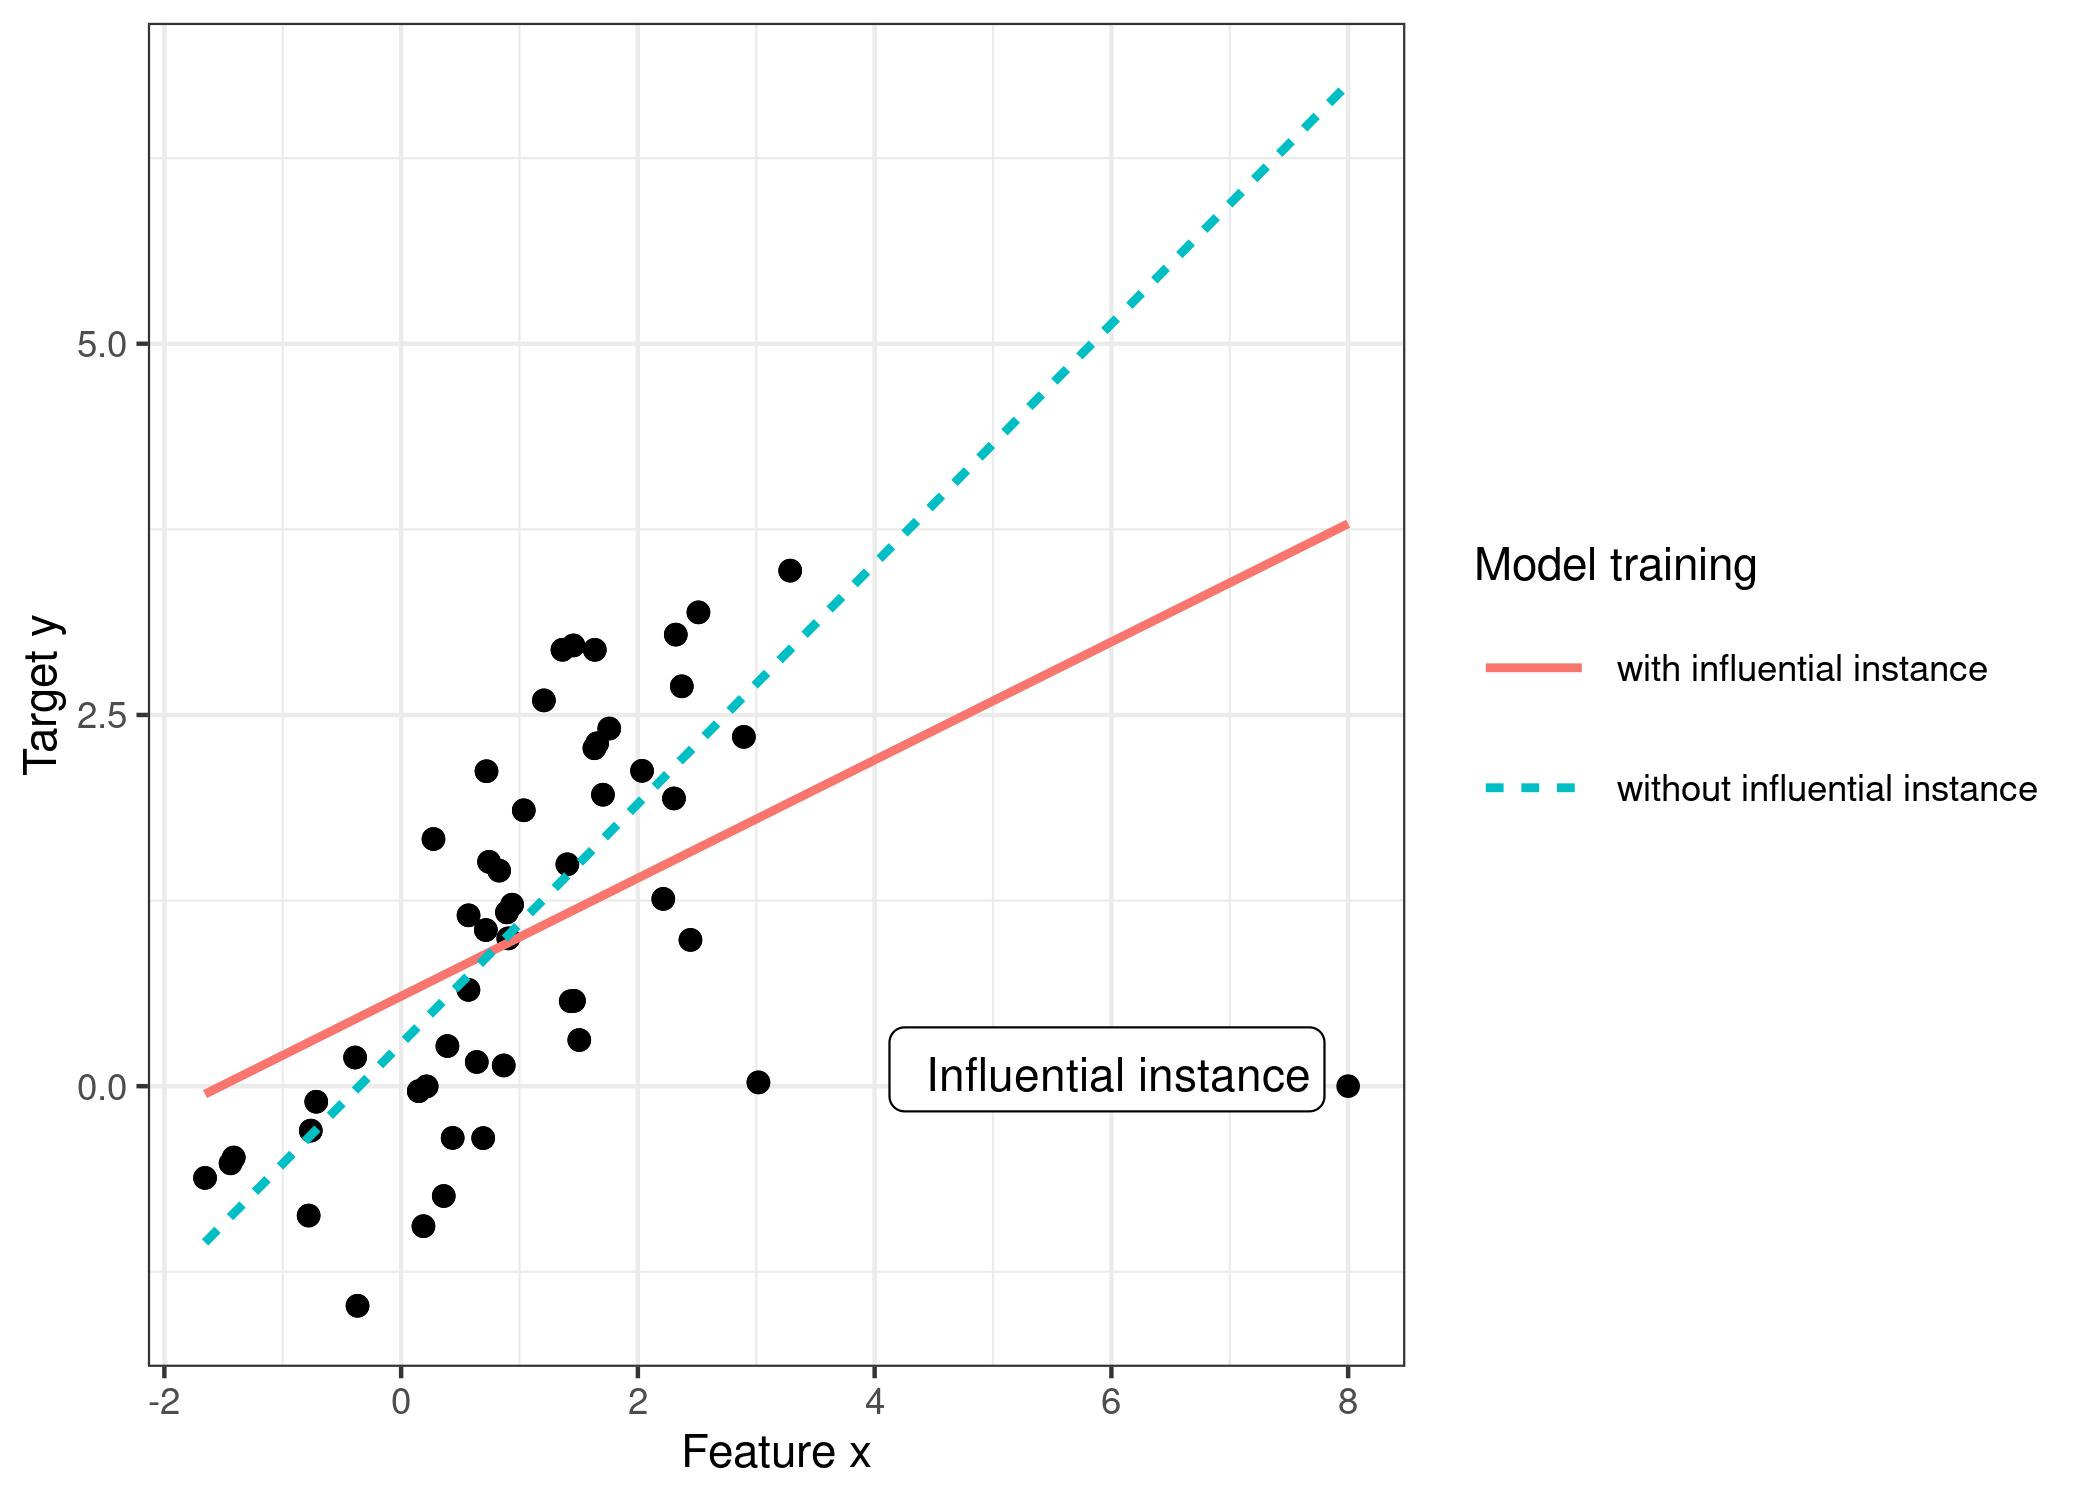 A linear model with one feature. Trained once on the full data and once without the influential instance. Removing the influential instance changes the fitted slope (weight/coefficient) drastically.